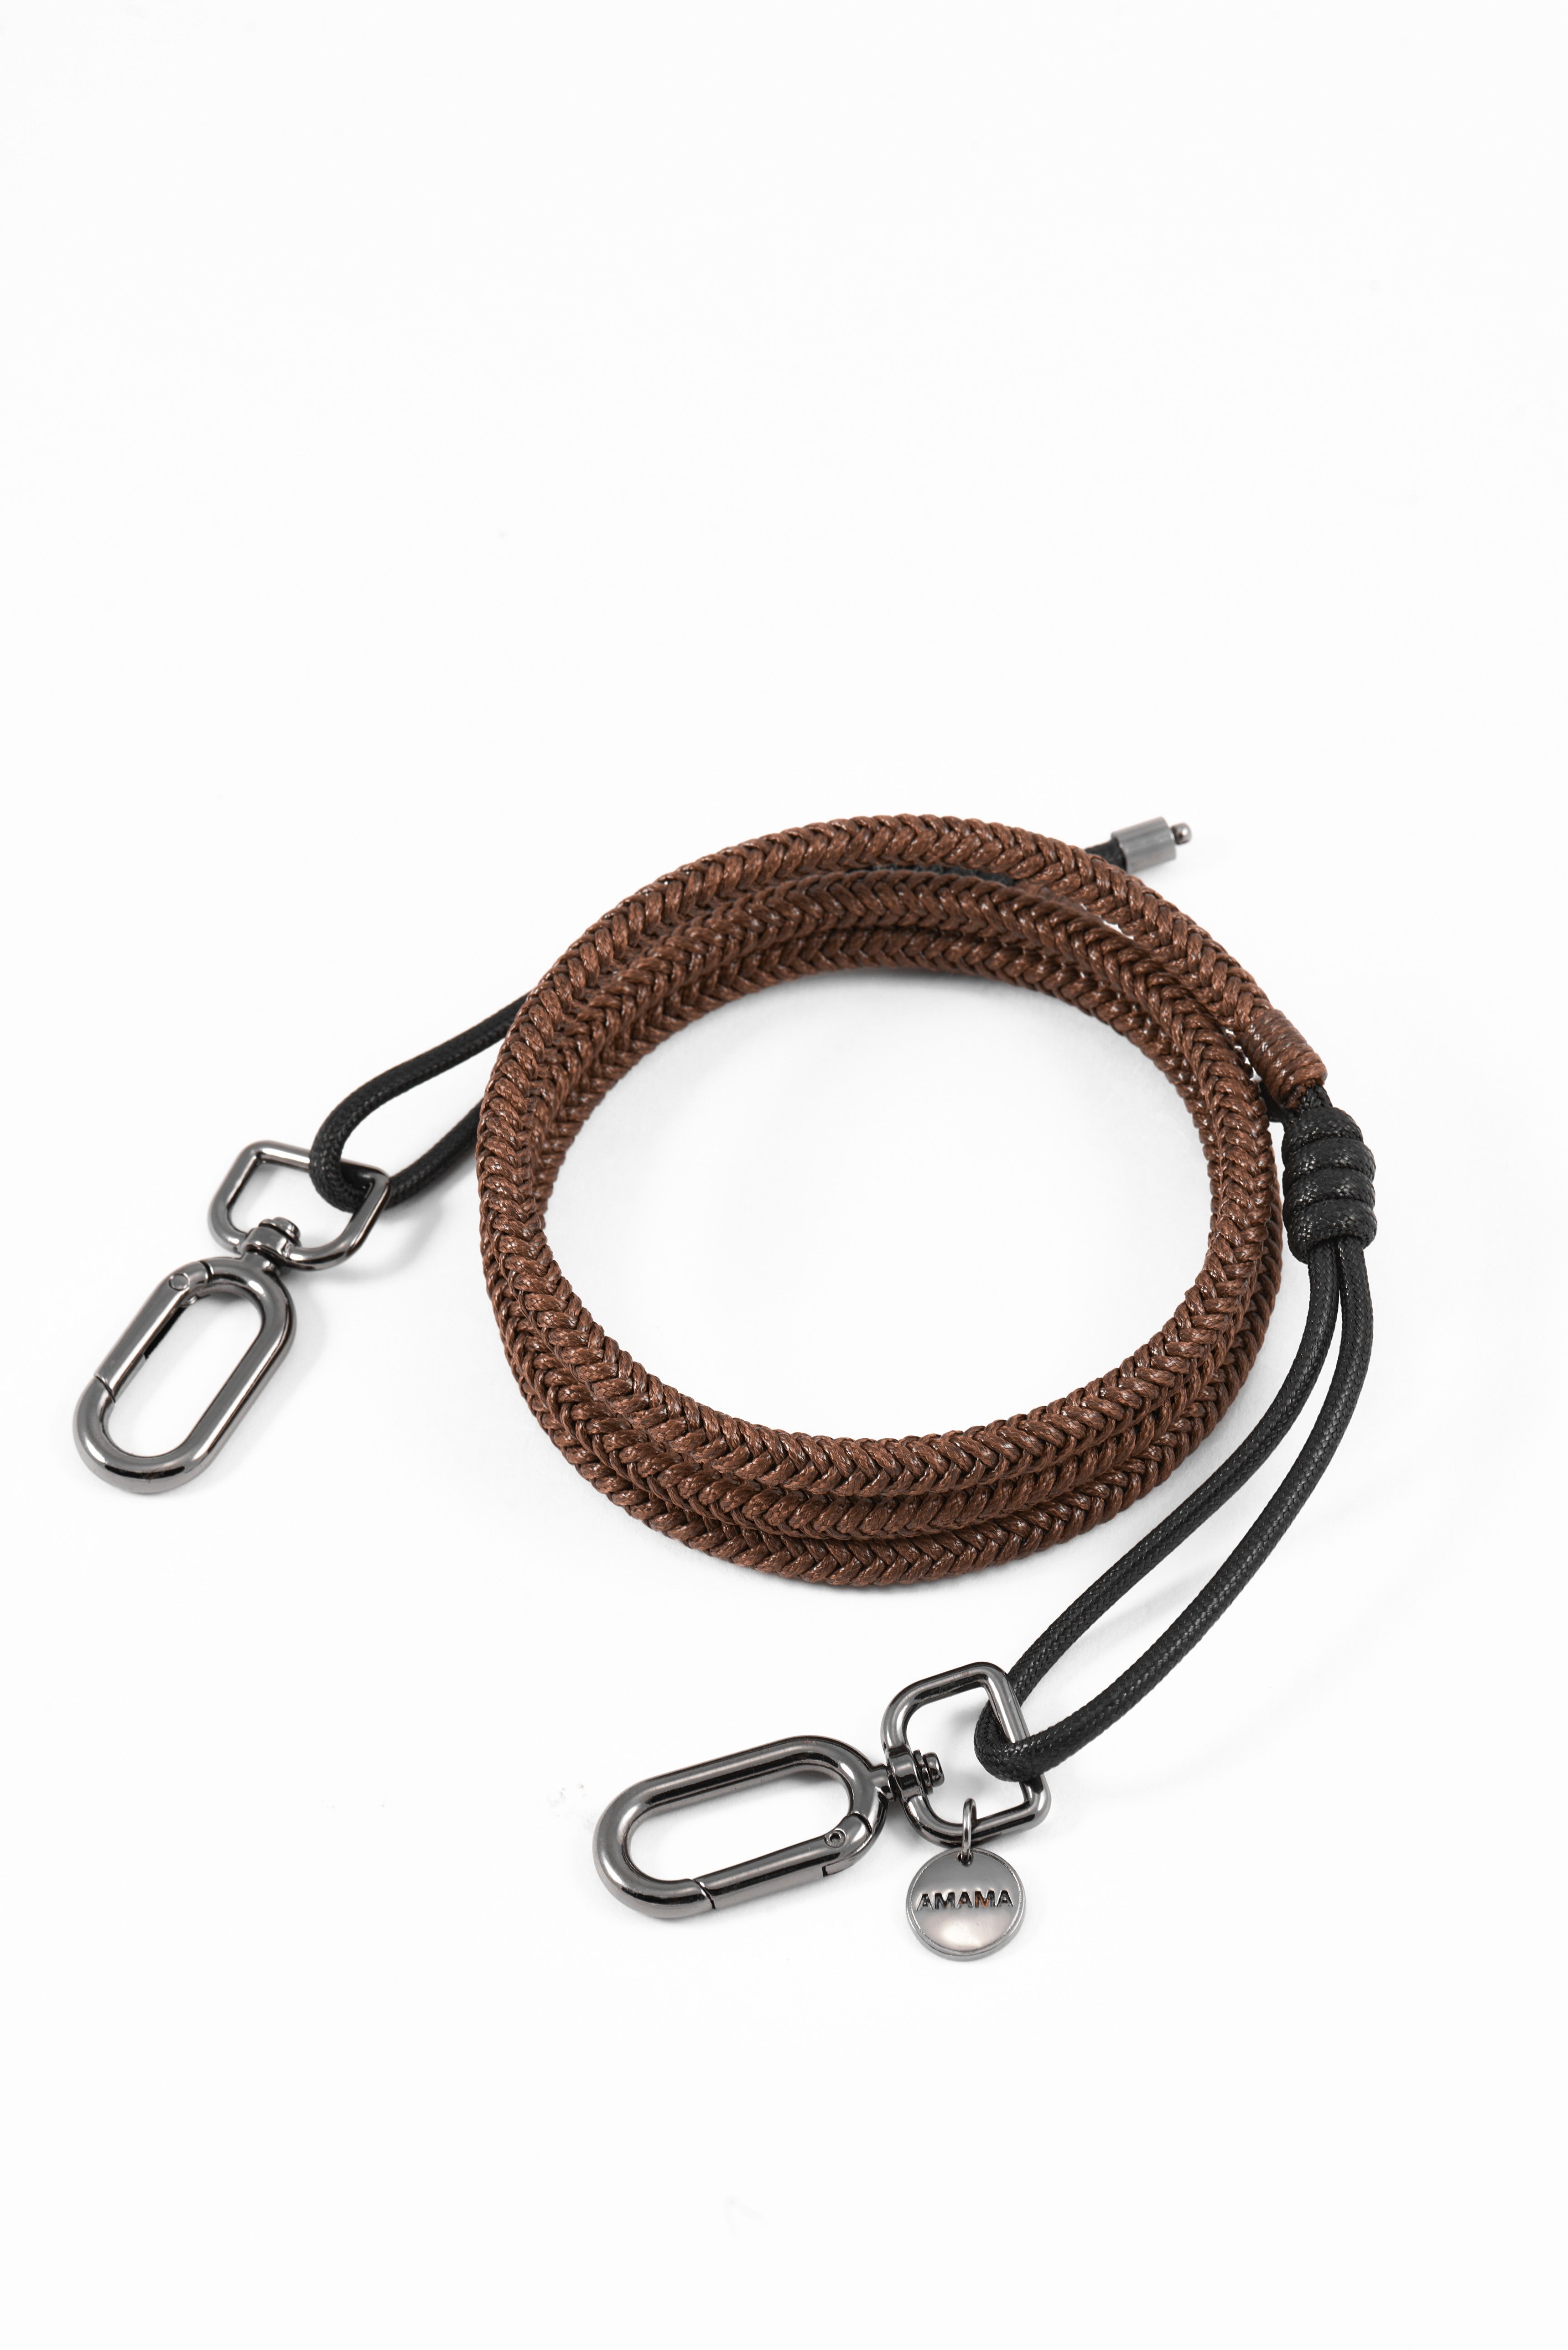 Amama,Orb cord in Umber Brown